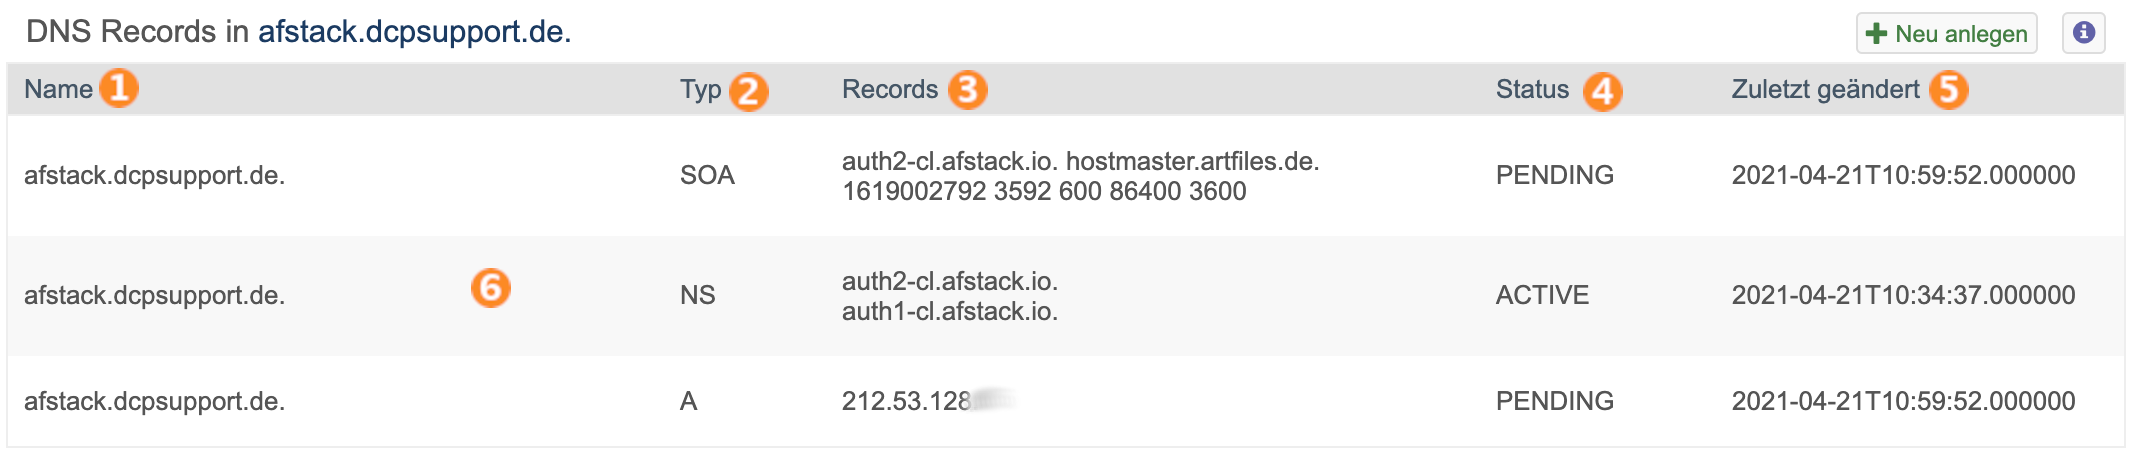 Afstack-dns-records-uebersicht.png